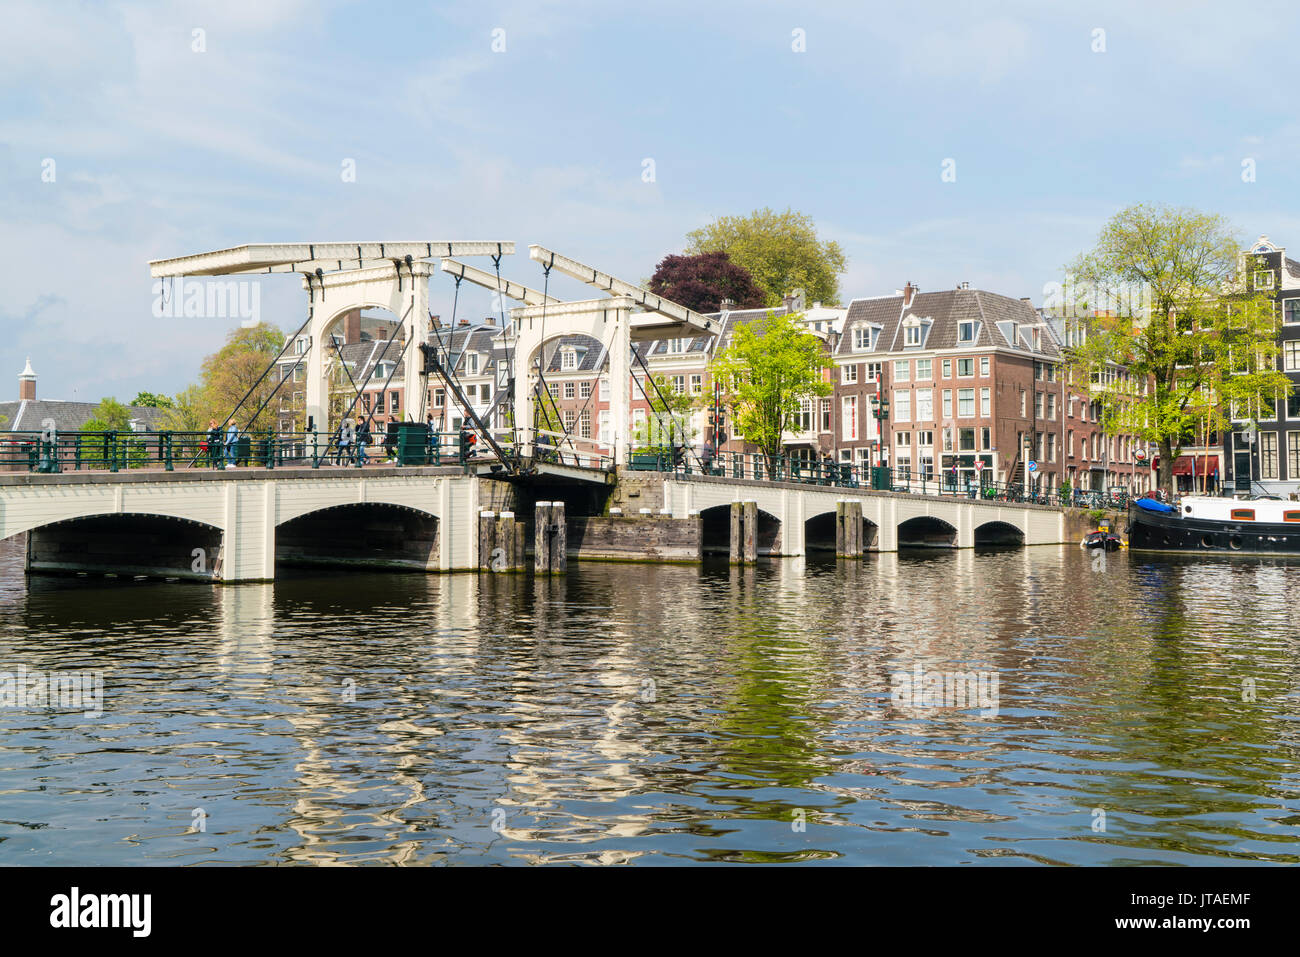 Magere Brug (The Skinny Bridge), Amsterdam, Pays-Bas, Europe Banque D'Images